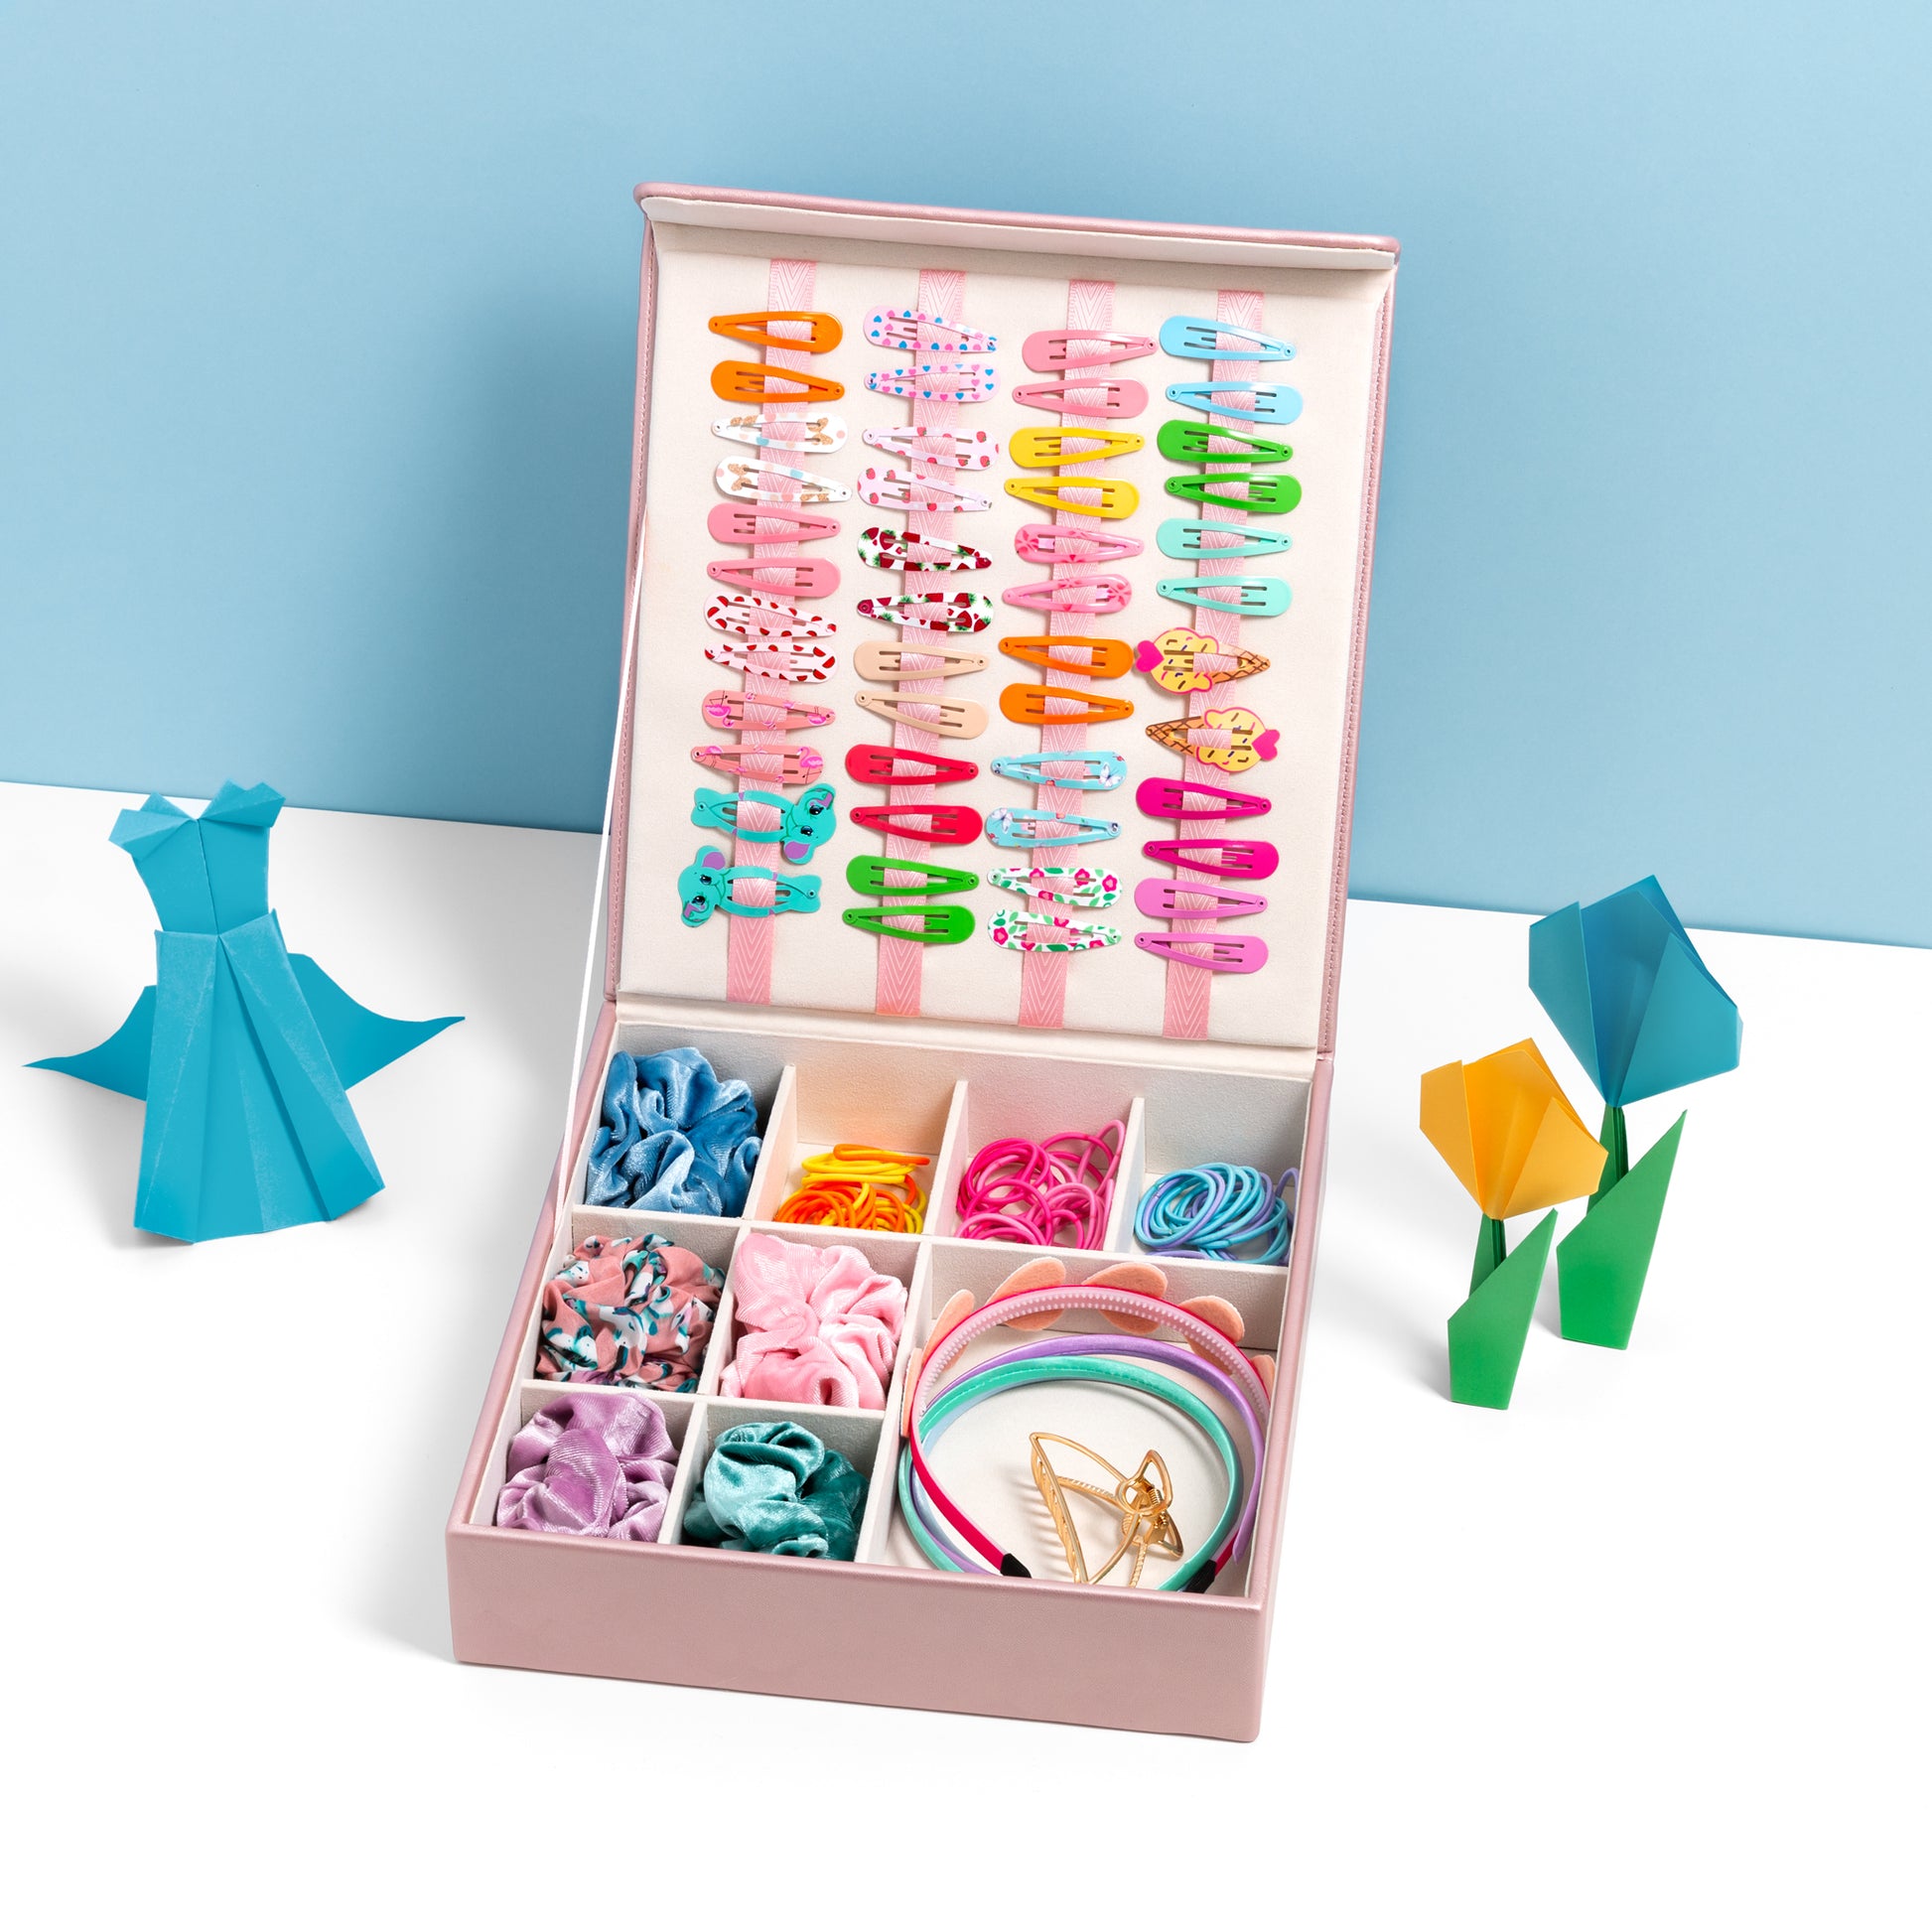 The hair accessory organiser in pink is filled with hair accessories and is placed open on a white surface with a blue backdrop. It is accessorised with some origami art work.